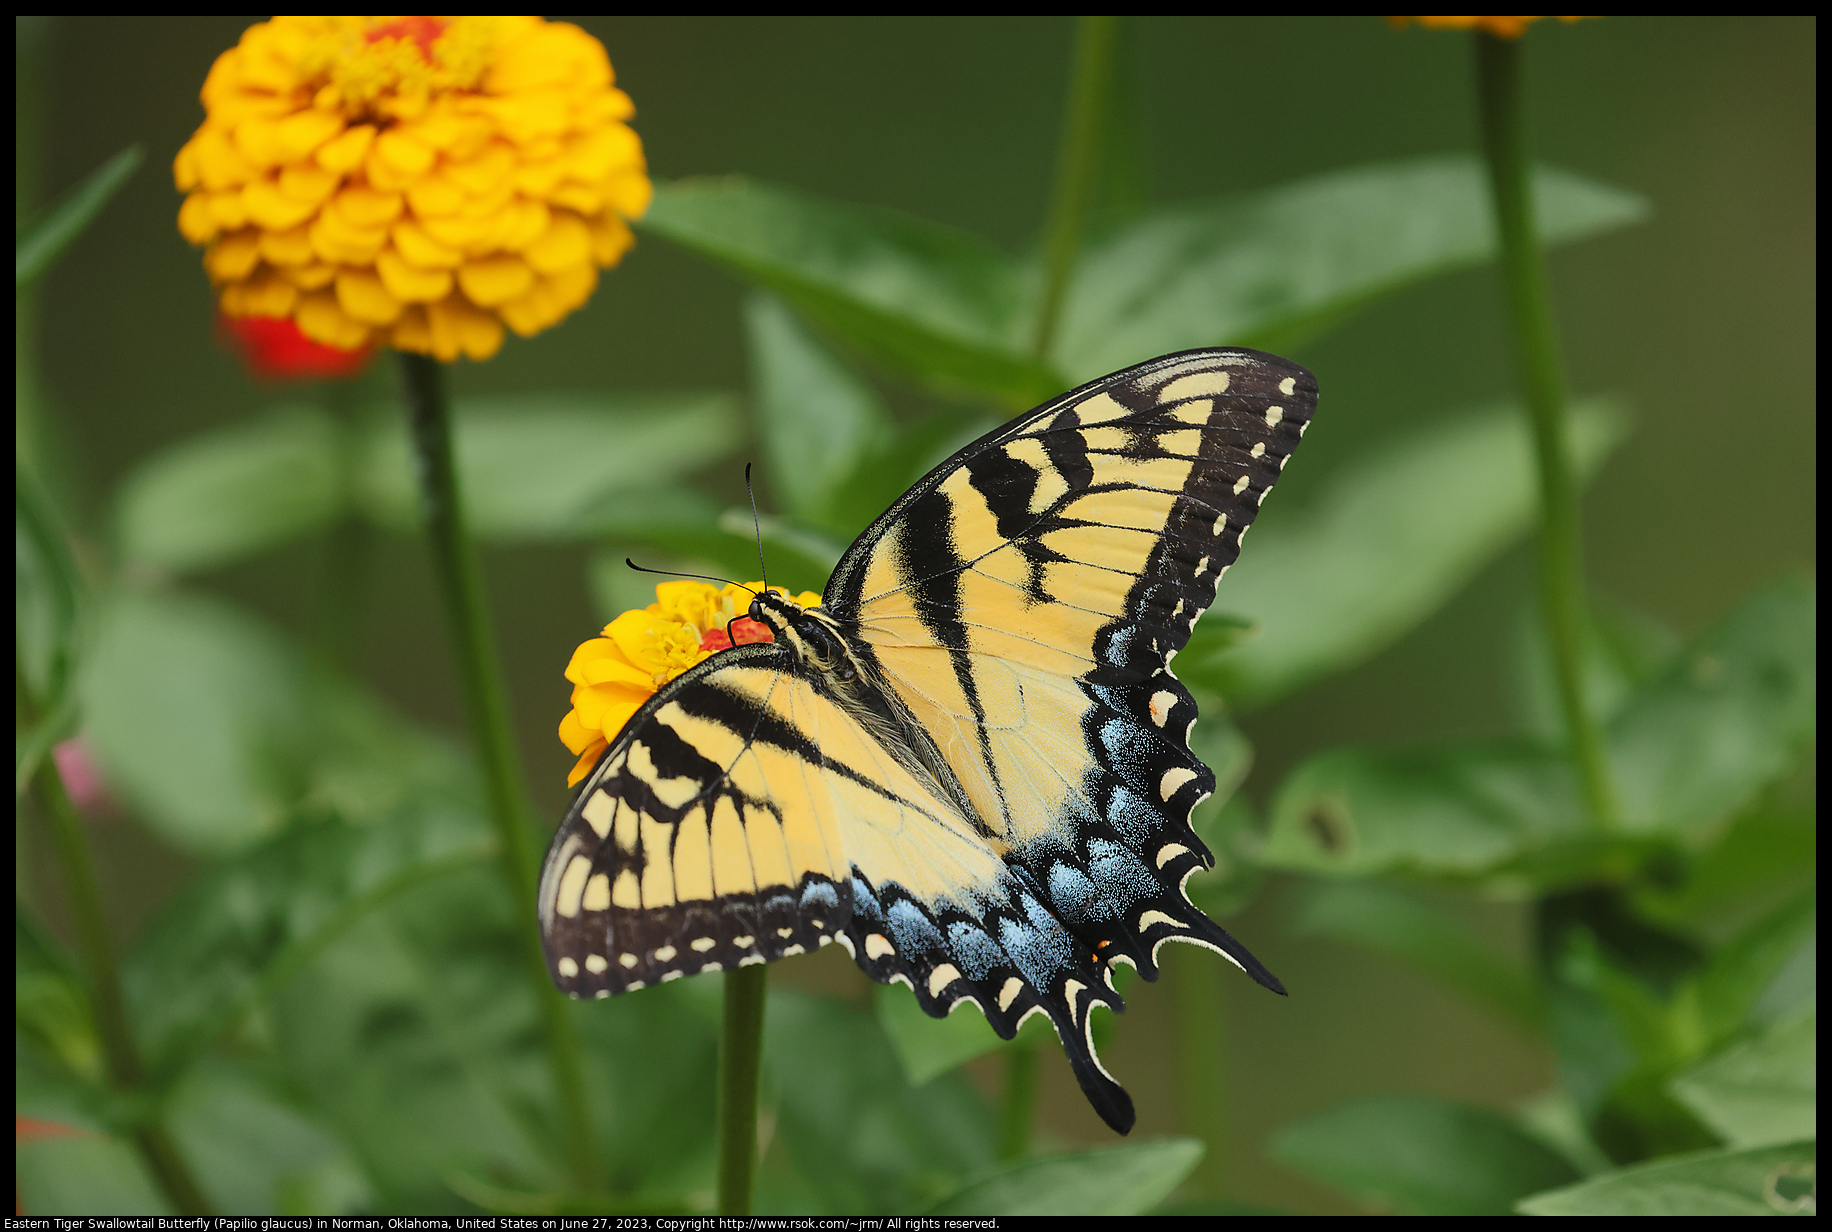 Eastern Tiger Swallowtail Butterfly (Papilio glaucus) in Norman, Oklahoma, United States on June 27, 2023